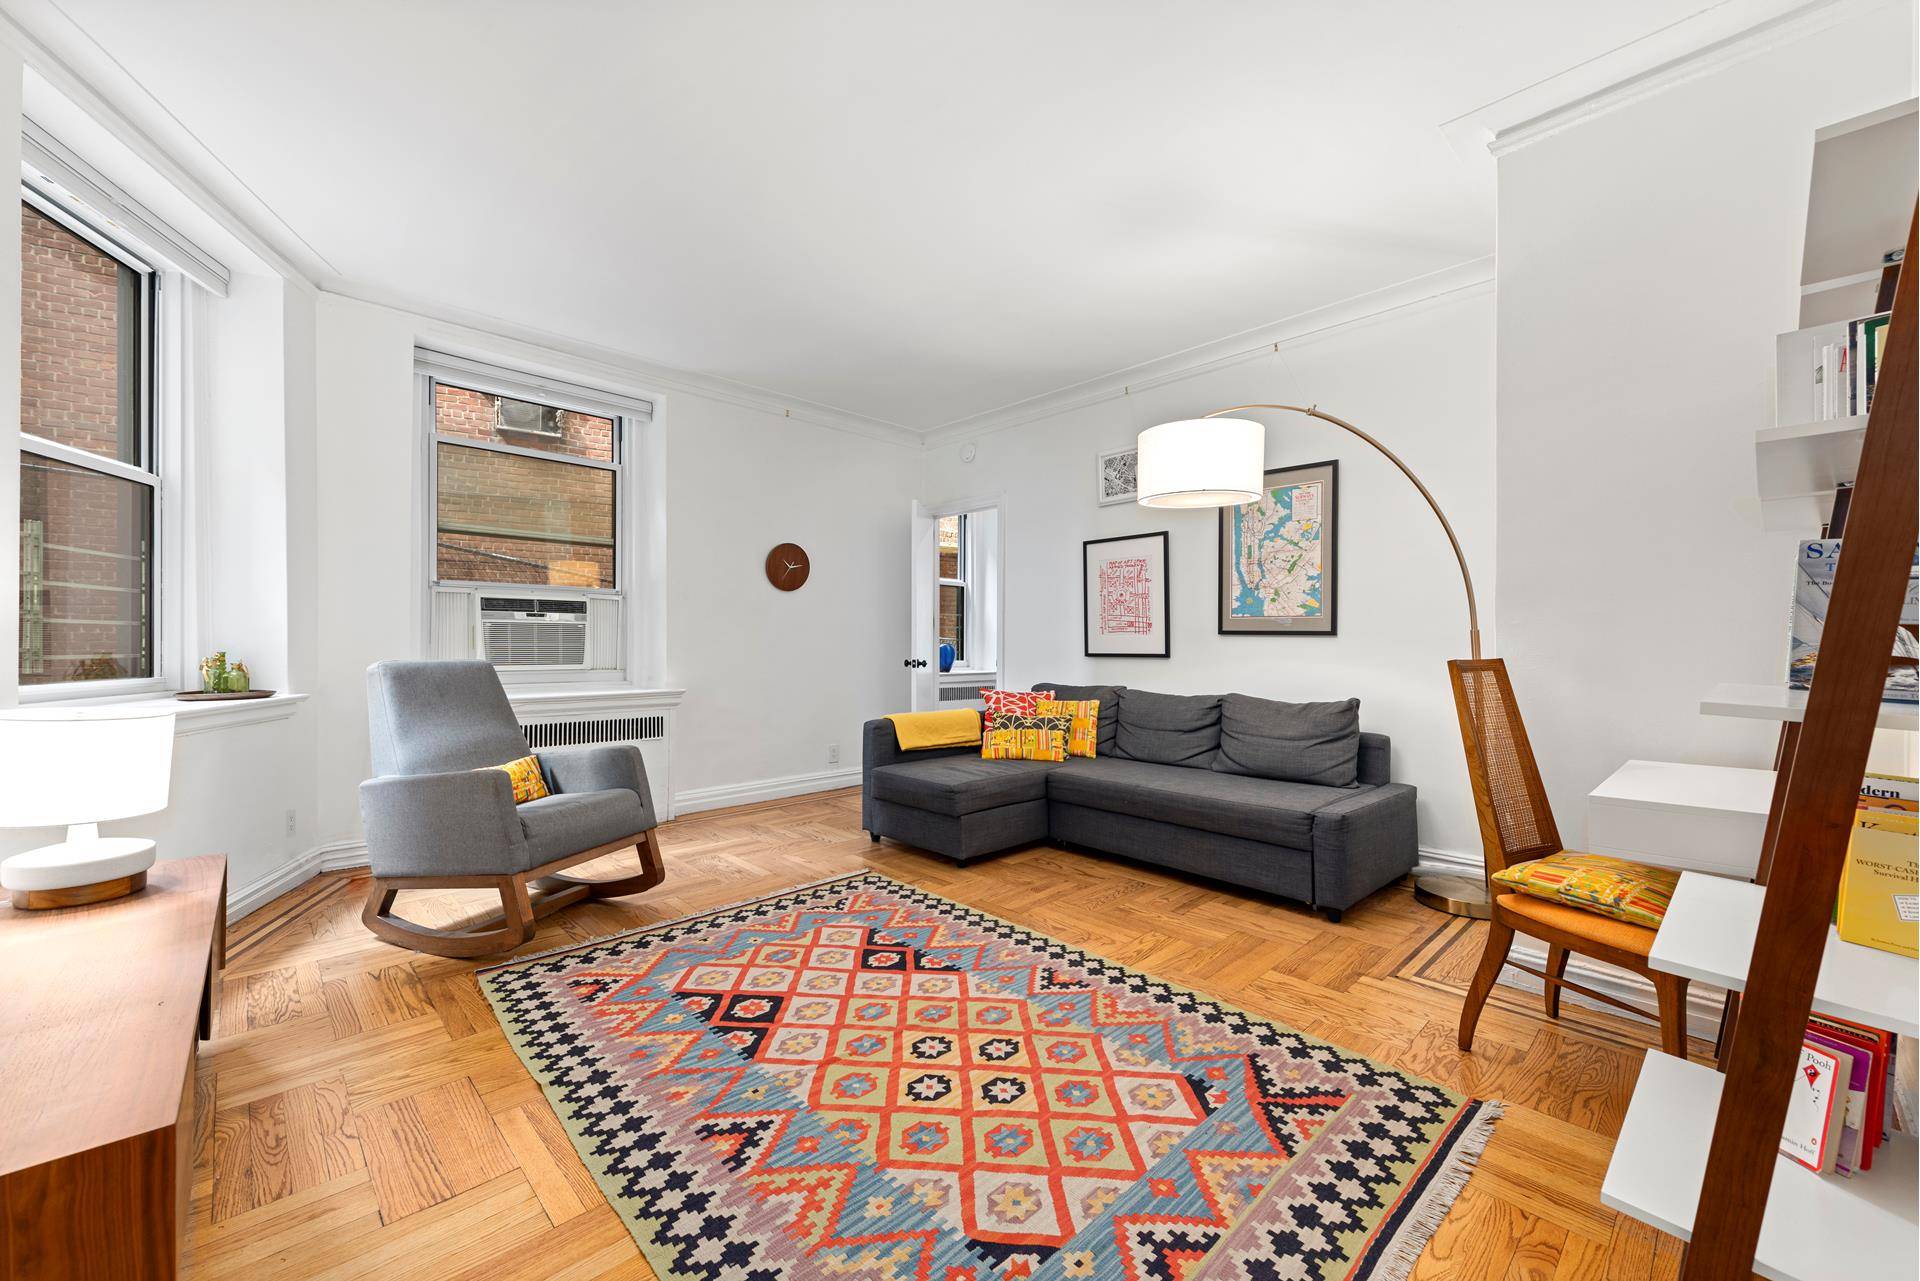 This thoughtfully renovated junior 4 apartment is spacious, sunny, and very charming.